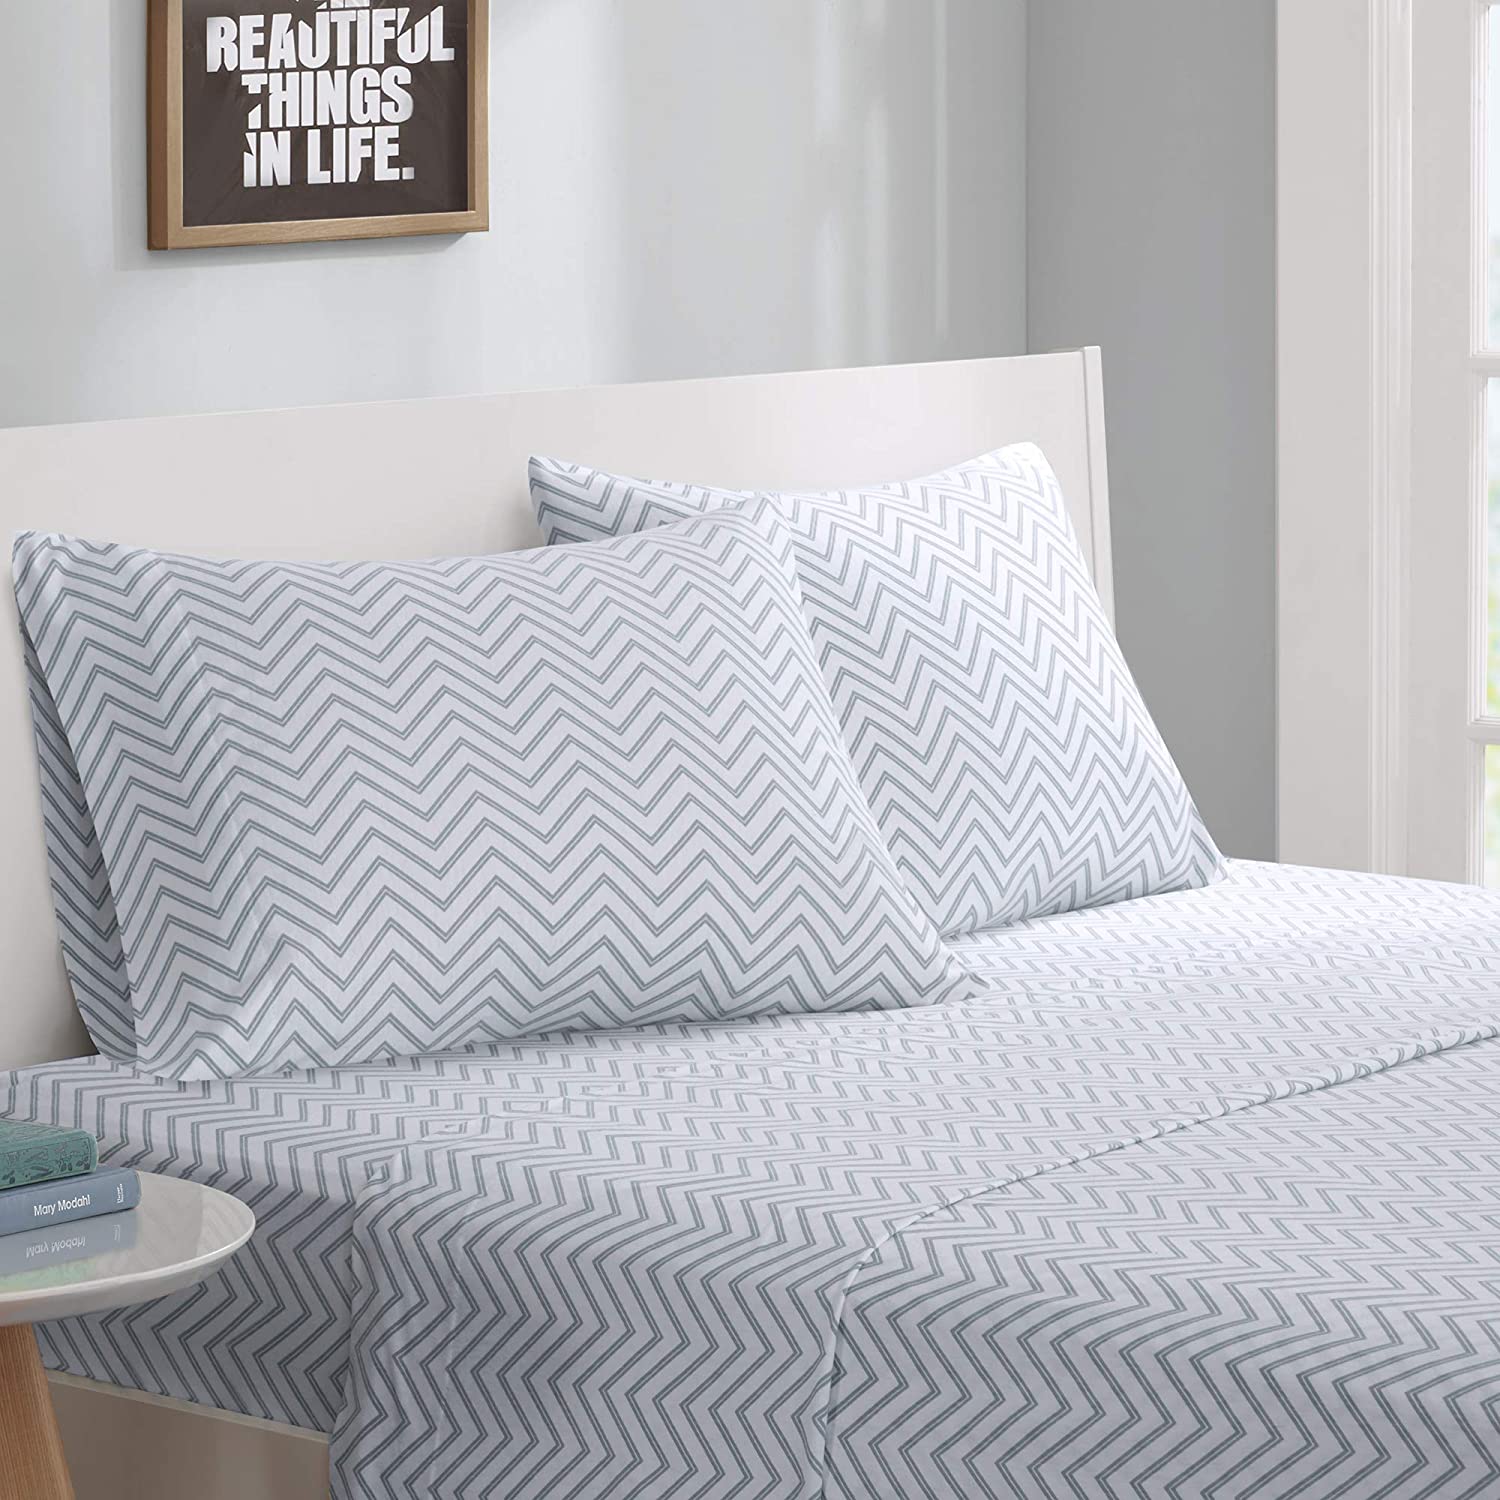 Intelligent Design Blend Jersey Knit Full, Coastal Cotton, Grey Chevron Bed Set 4-Piece Include Flat, Fitted Sheet &amp; 2 Pillowcases